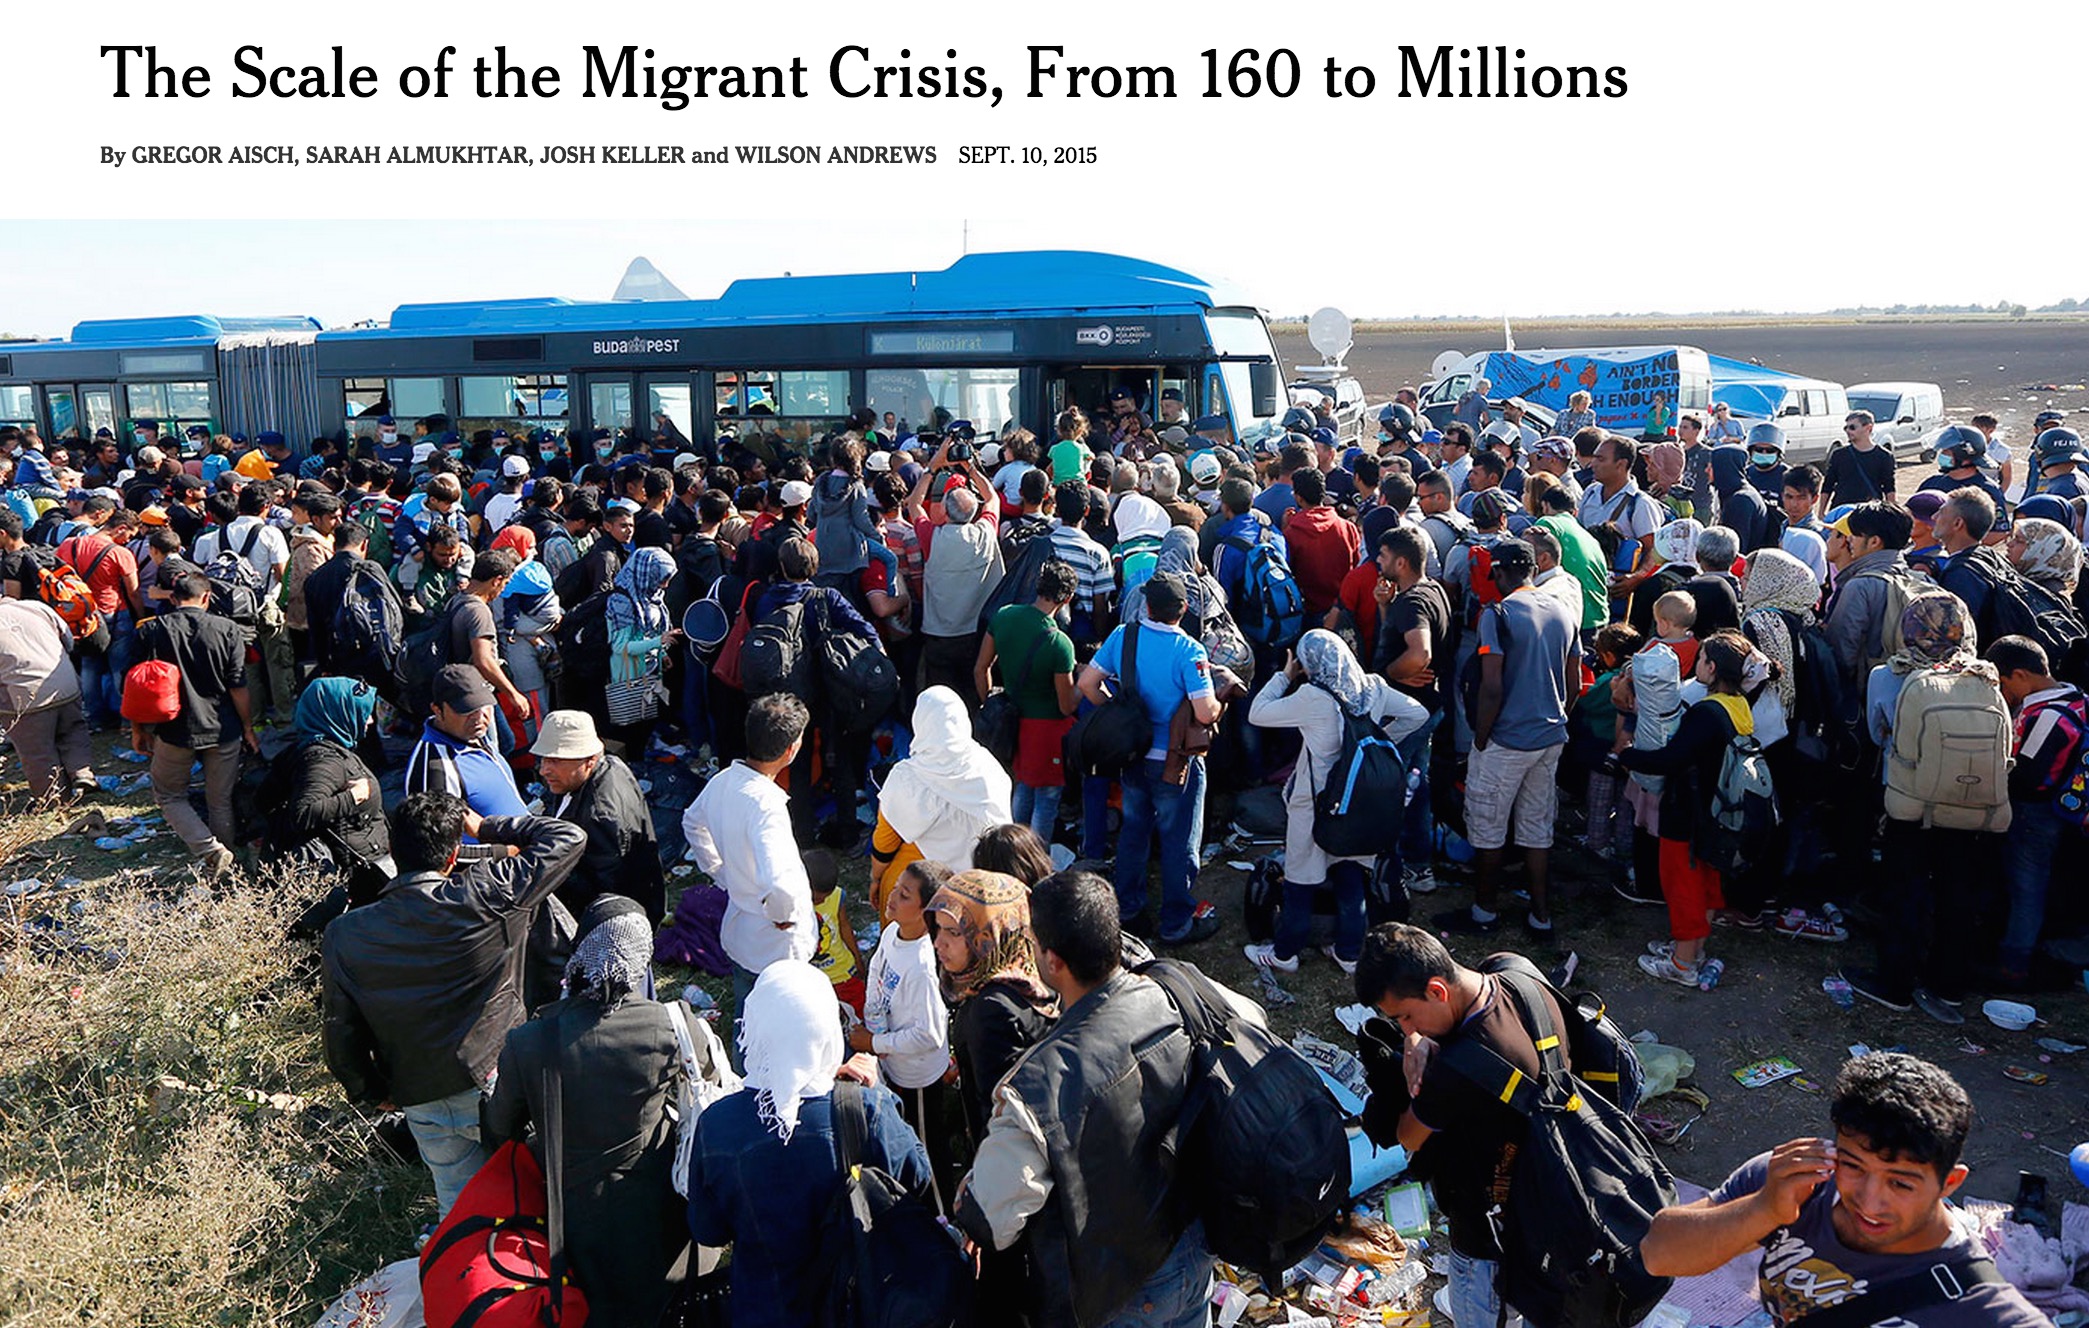 The Scale of the Migrant Crisis, From 160 to Millions